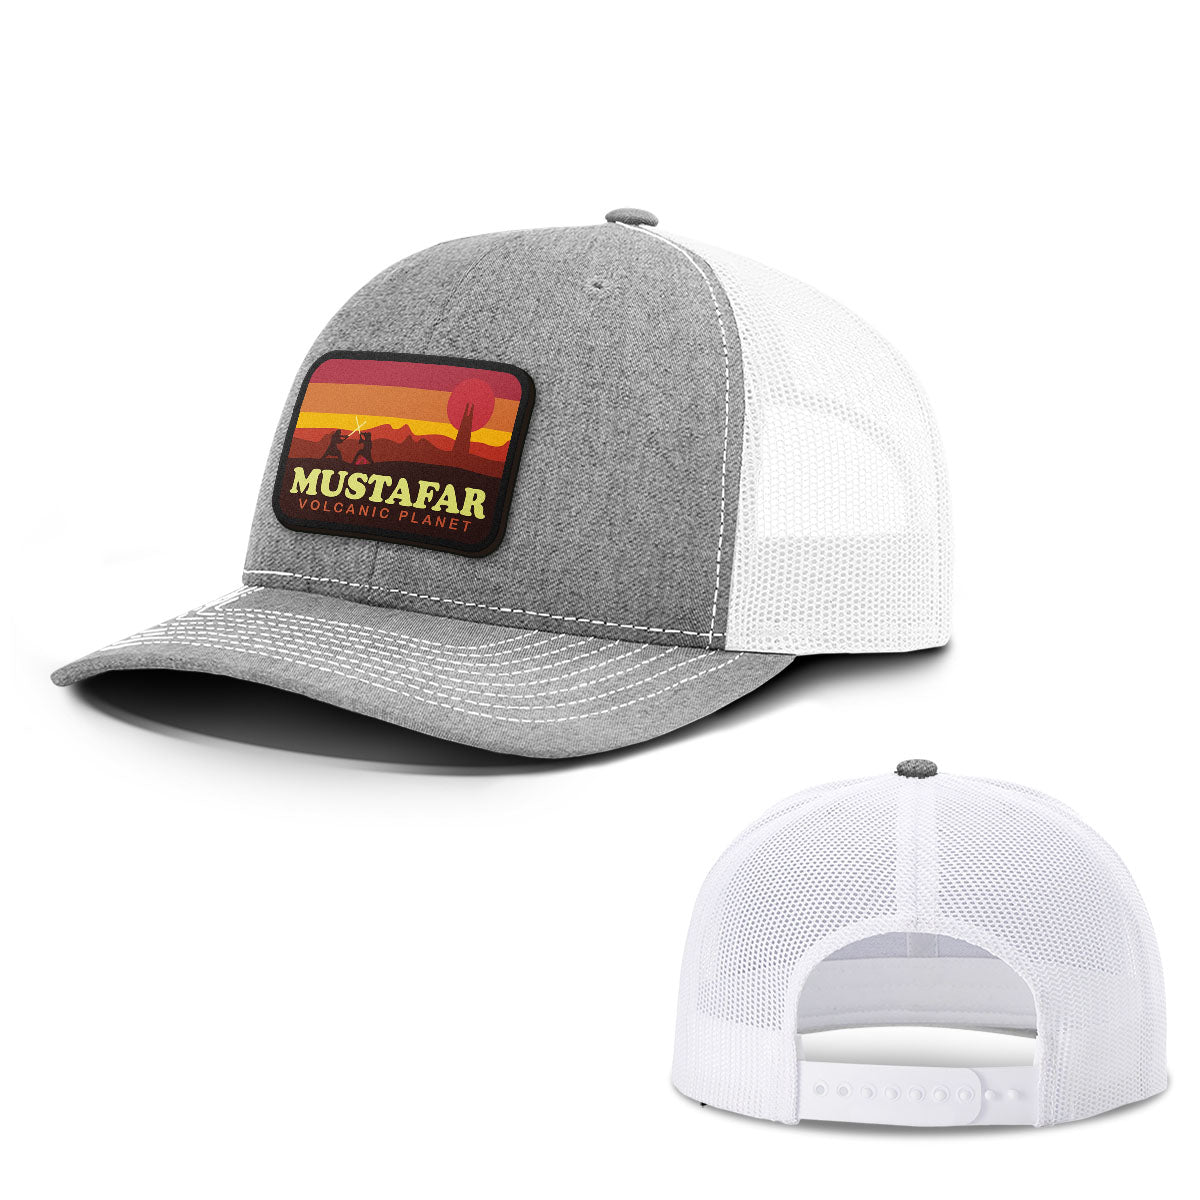 Mustafar Volcanic Planet Patch Hats - BustedTees.com